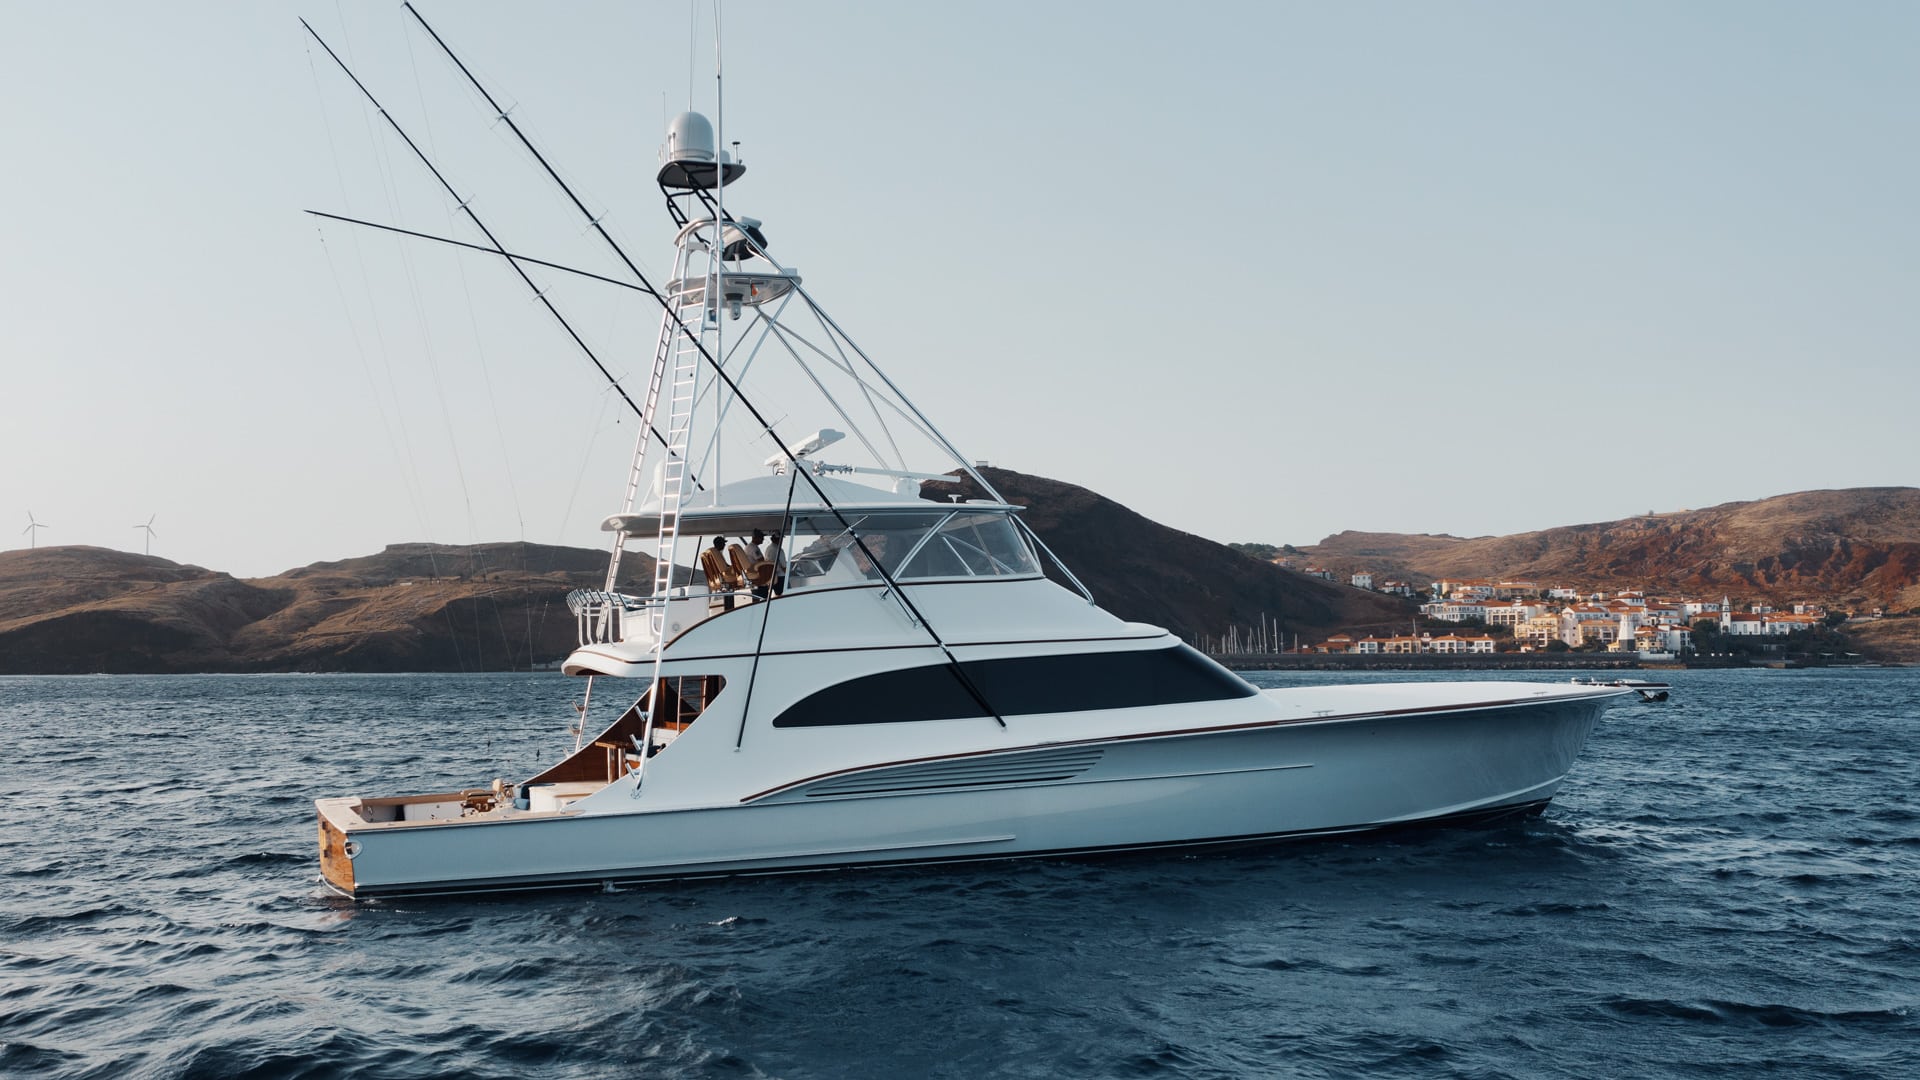 How Much Is A Sportfishing Yacht?